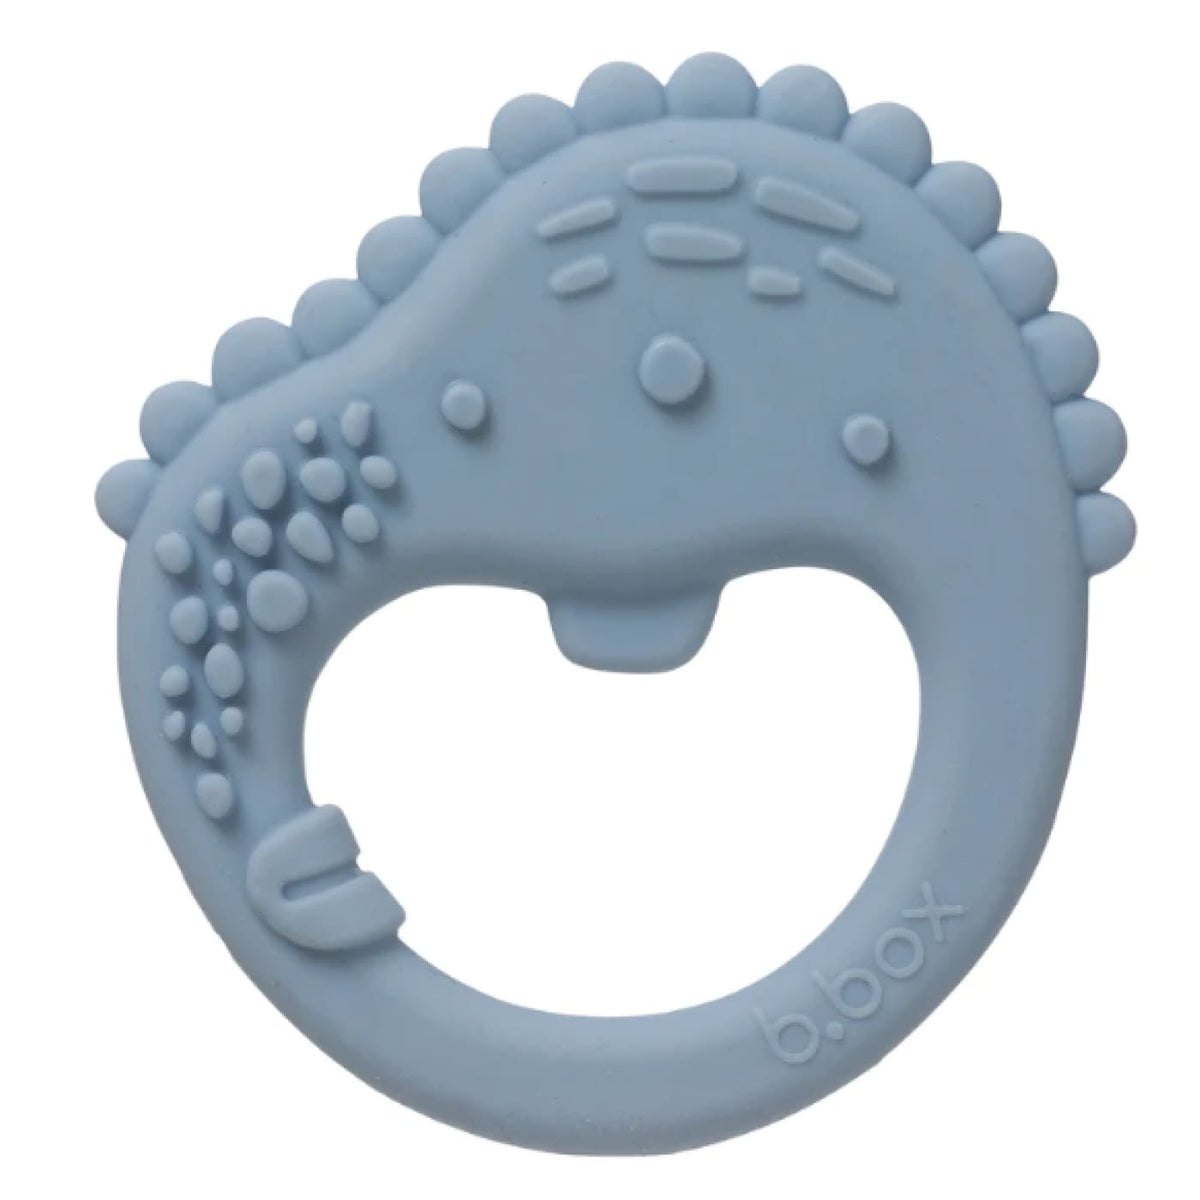 b.box Trio Teether - Lullaby Blue Monsters - Lullaby Blue Monsters - NURSING &amp; FEEDING - TEETHERS/TEETHING JEWELLERY